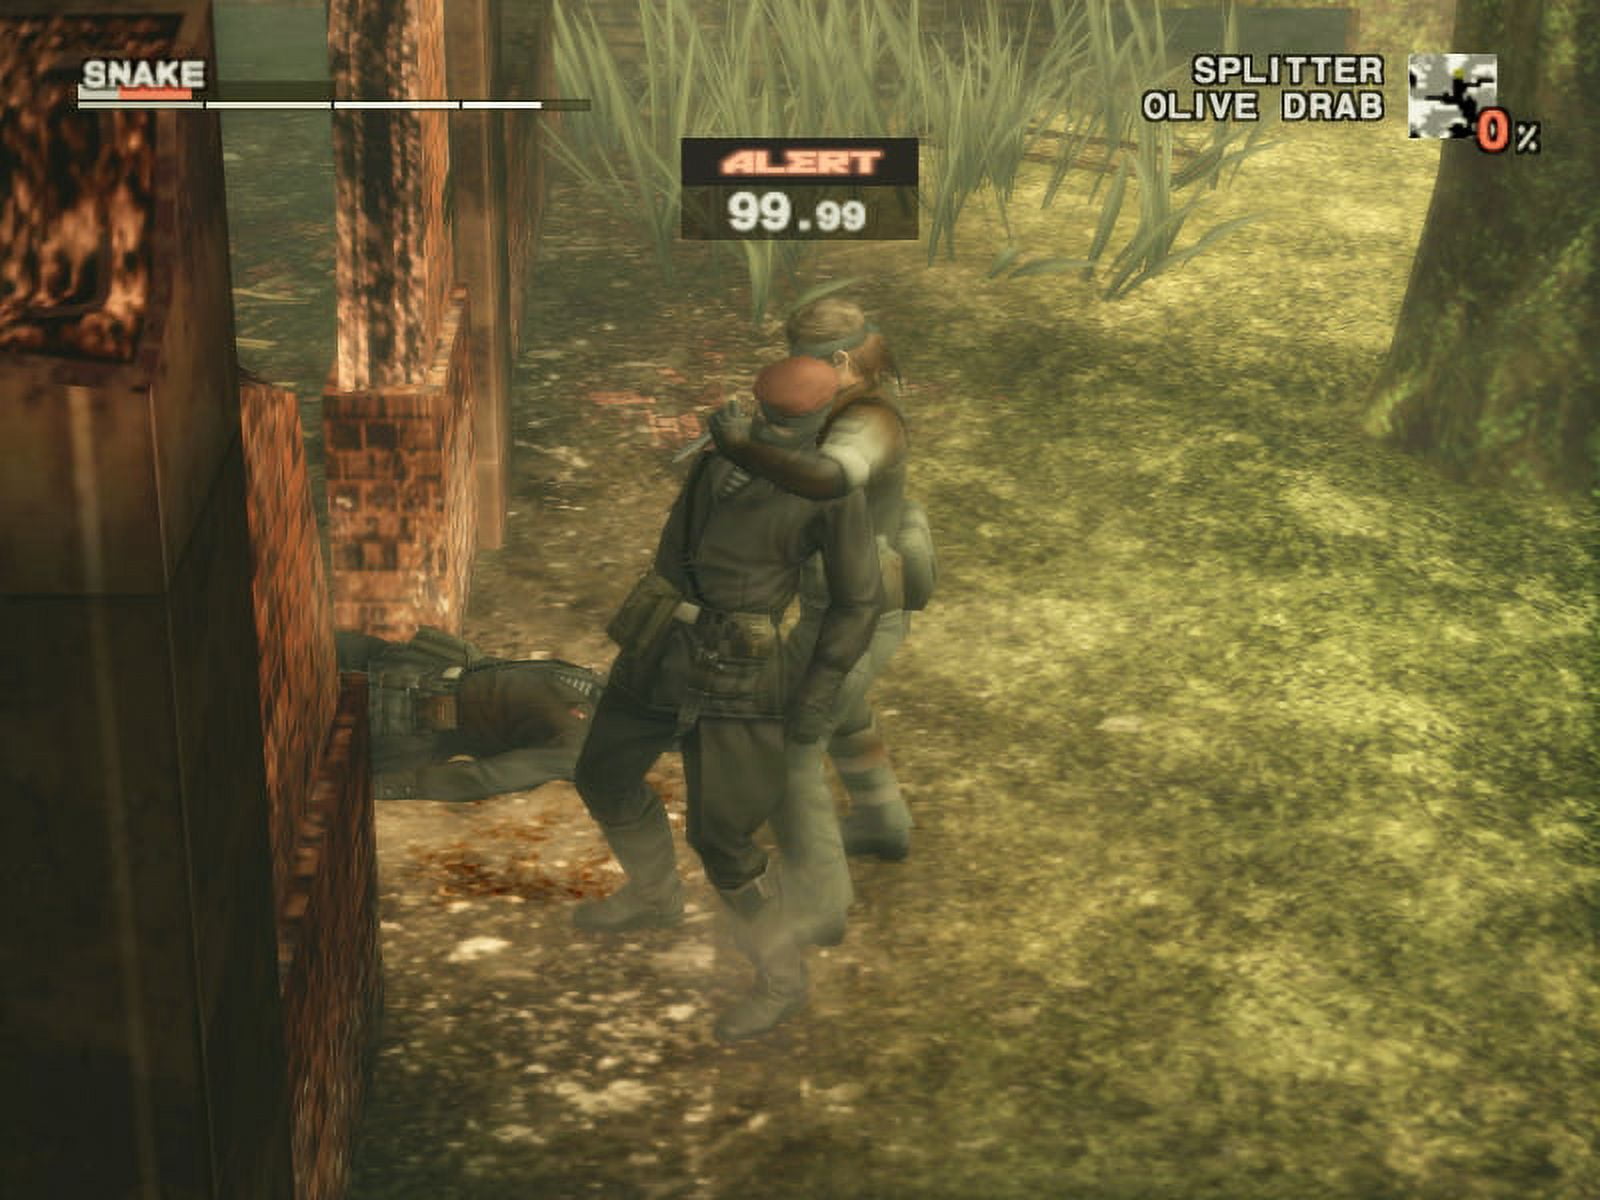  Metal Gear Solid 3 Snake Eater - PlayStation 2 : Unknown: Video  Games